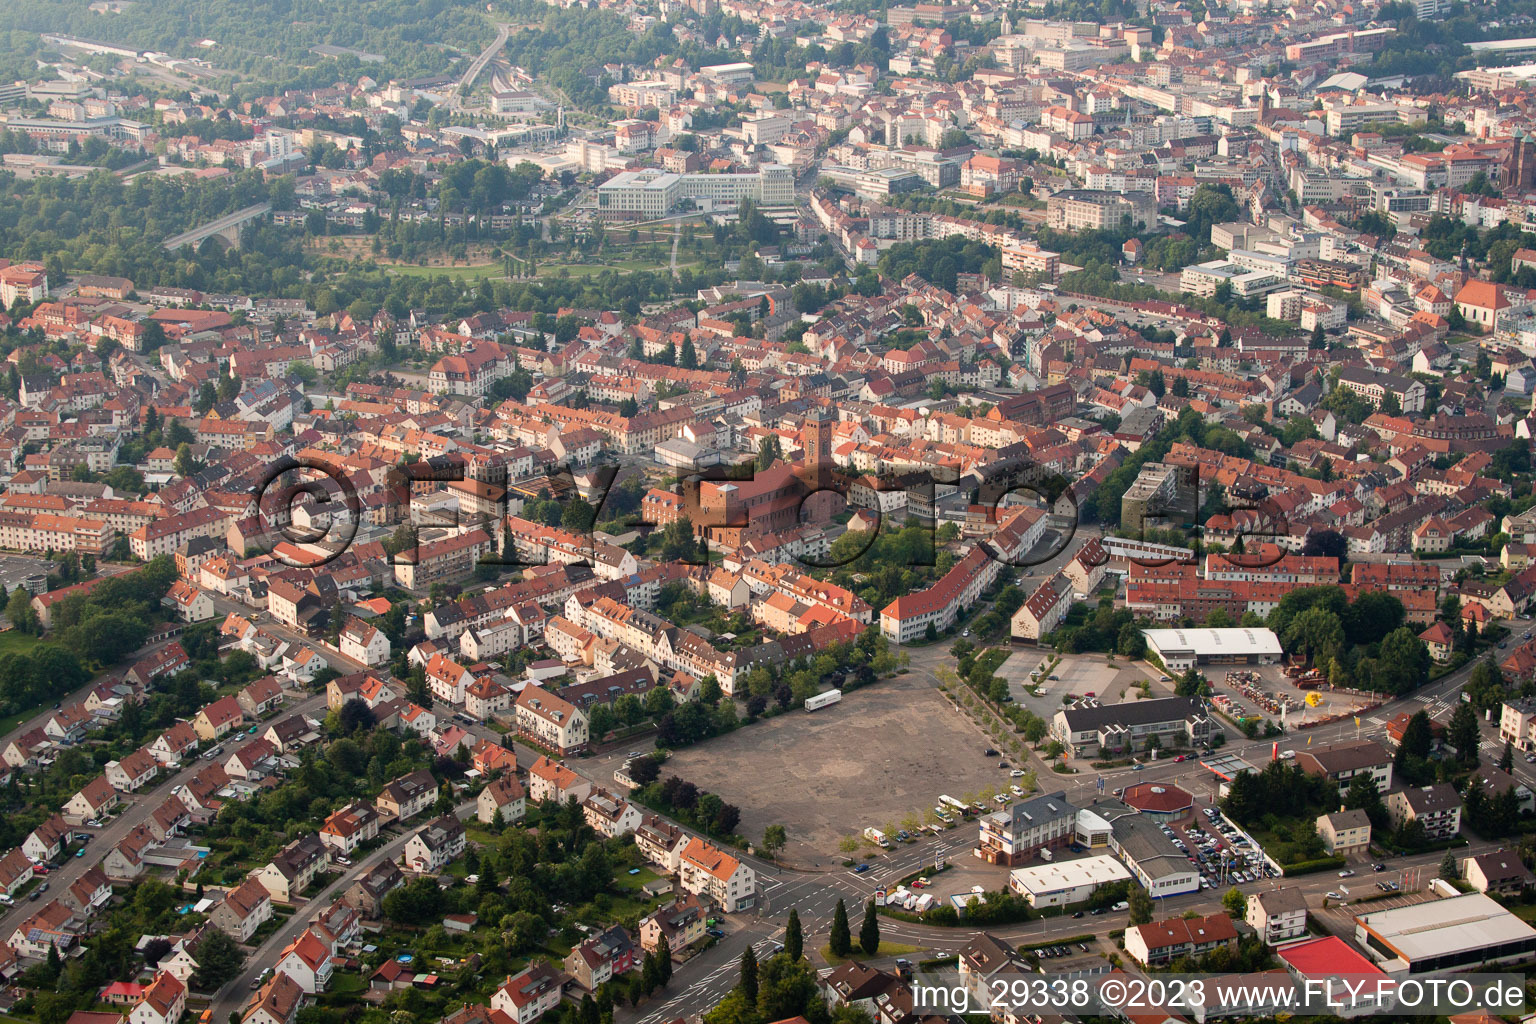 Pirmasens in the state Rhineland-Palatinate, Germany seen from above